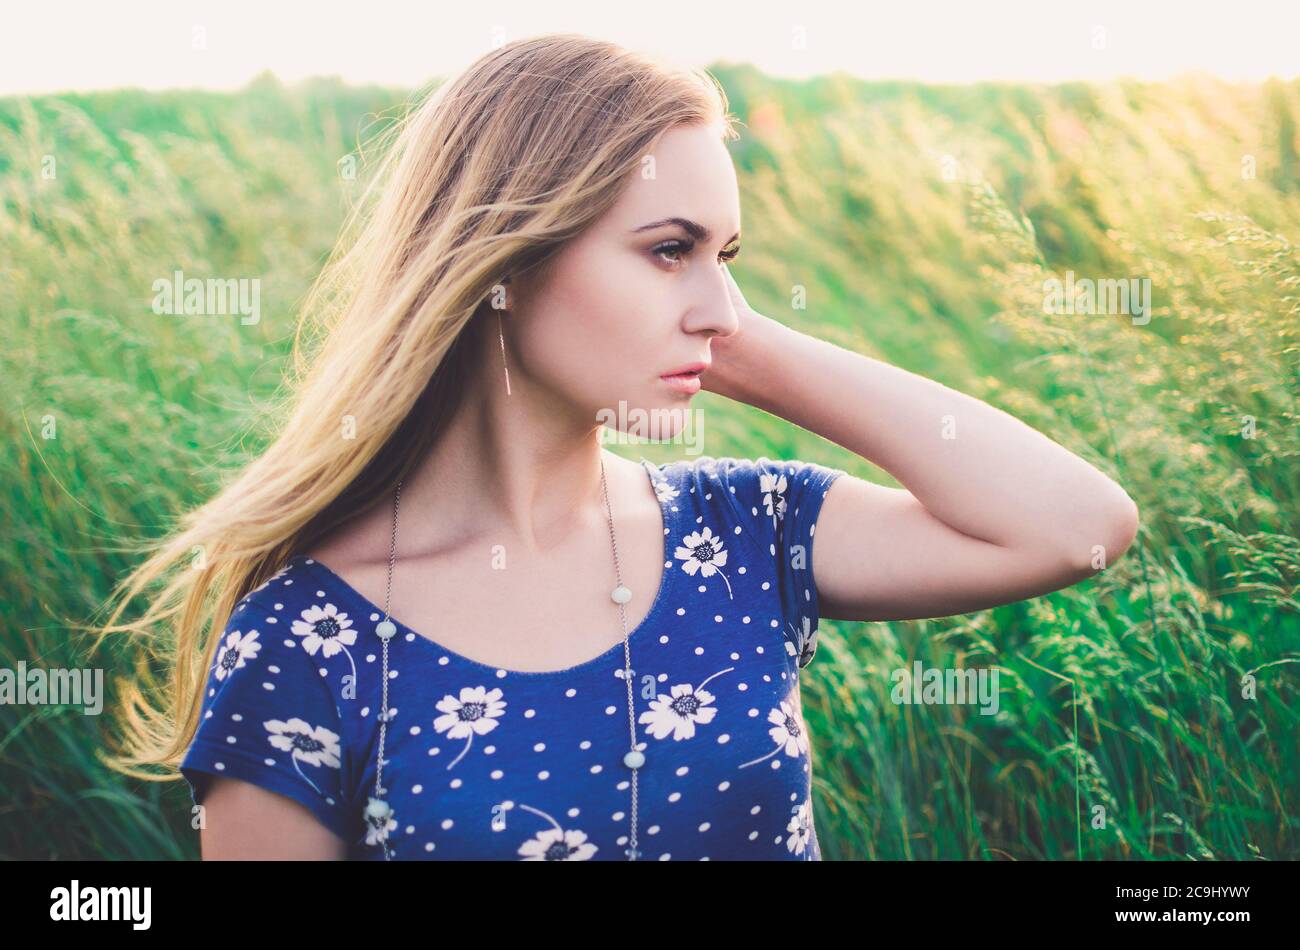 Girl blonde in a blue short tight dress sit in tall grass Stock Photo